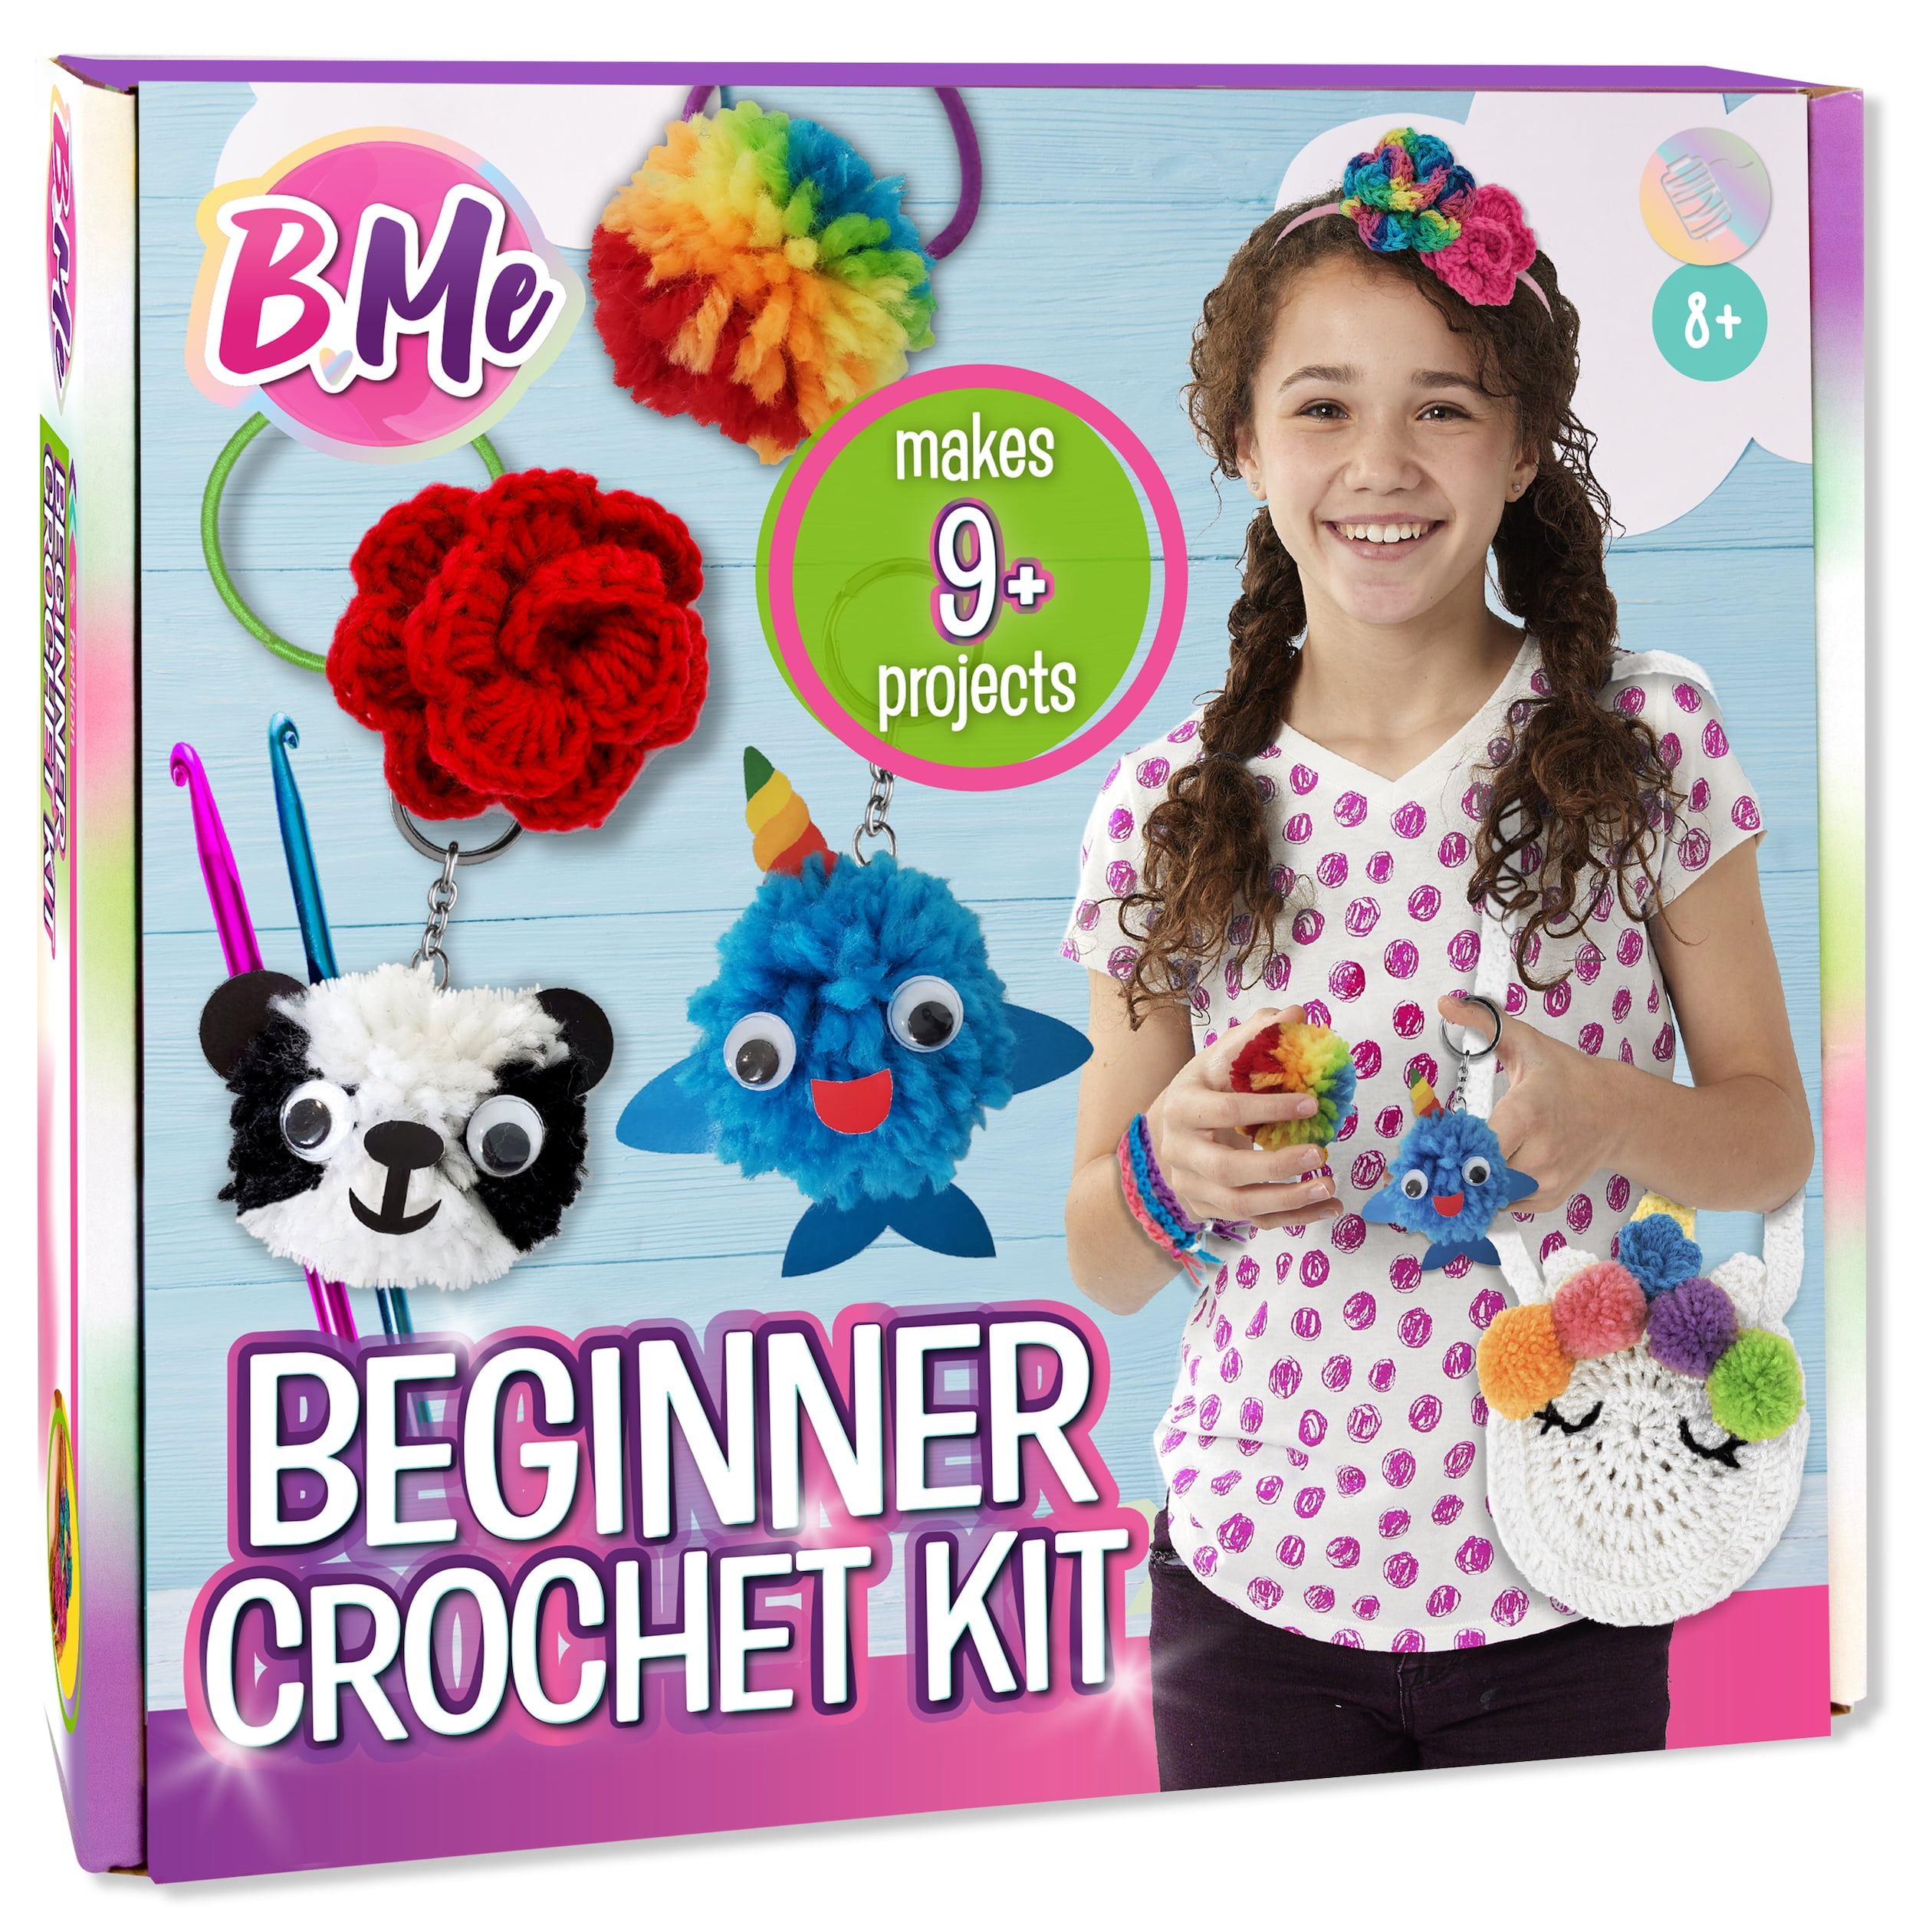 Creative Kids DIY All in One Crochet Knitting Kit for Beginners Starter Arts & Craft Set for Kids Teens Tweens & Adults - How to Learn Make